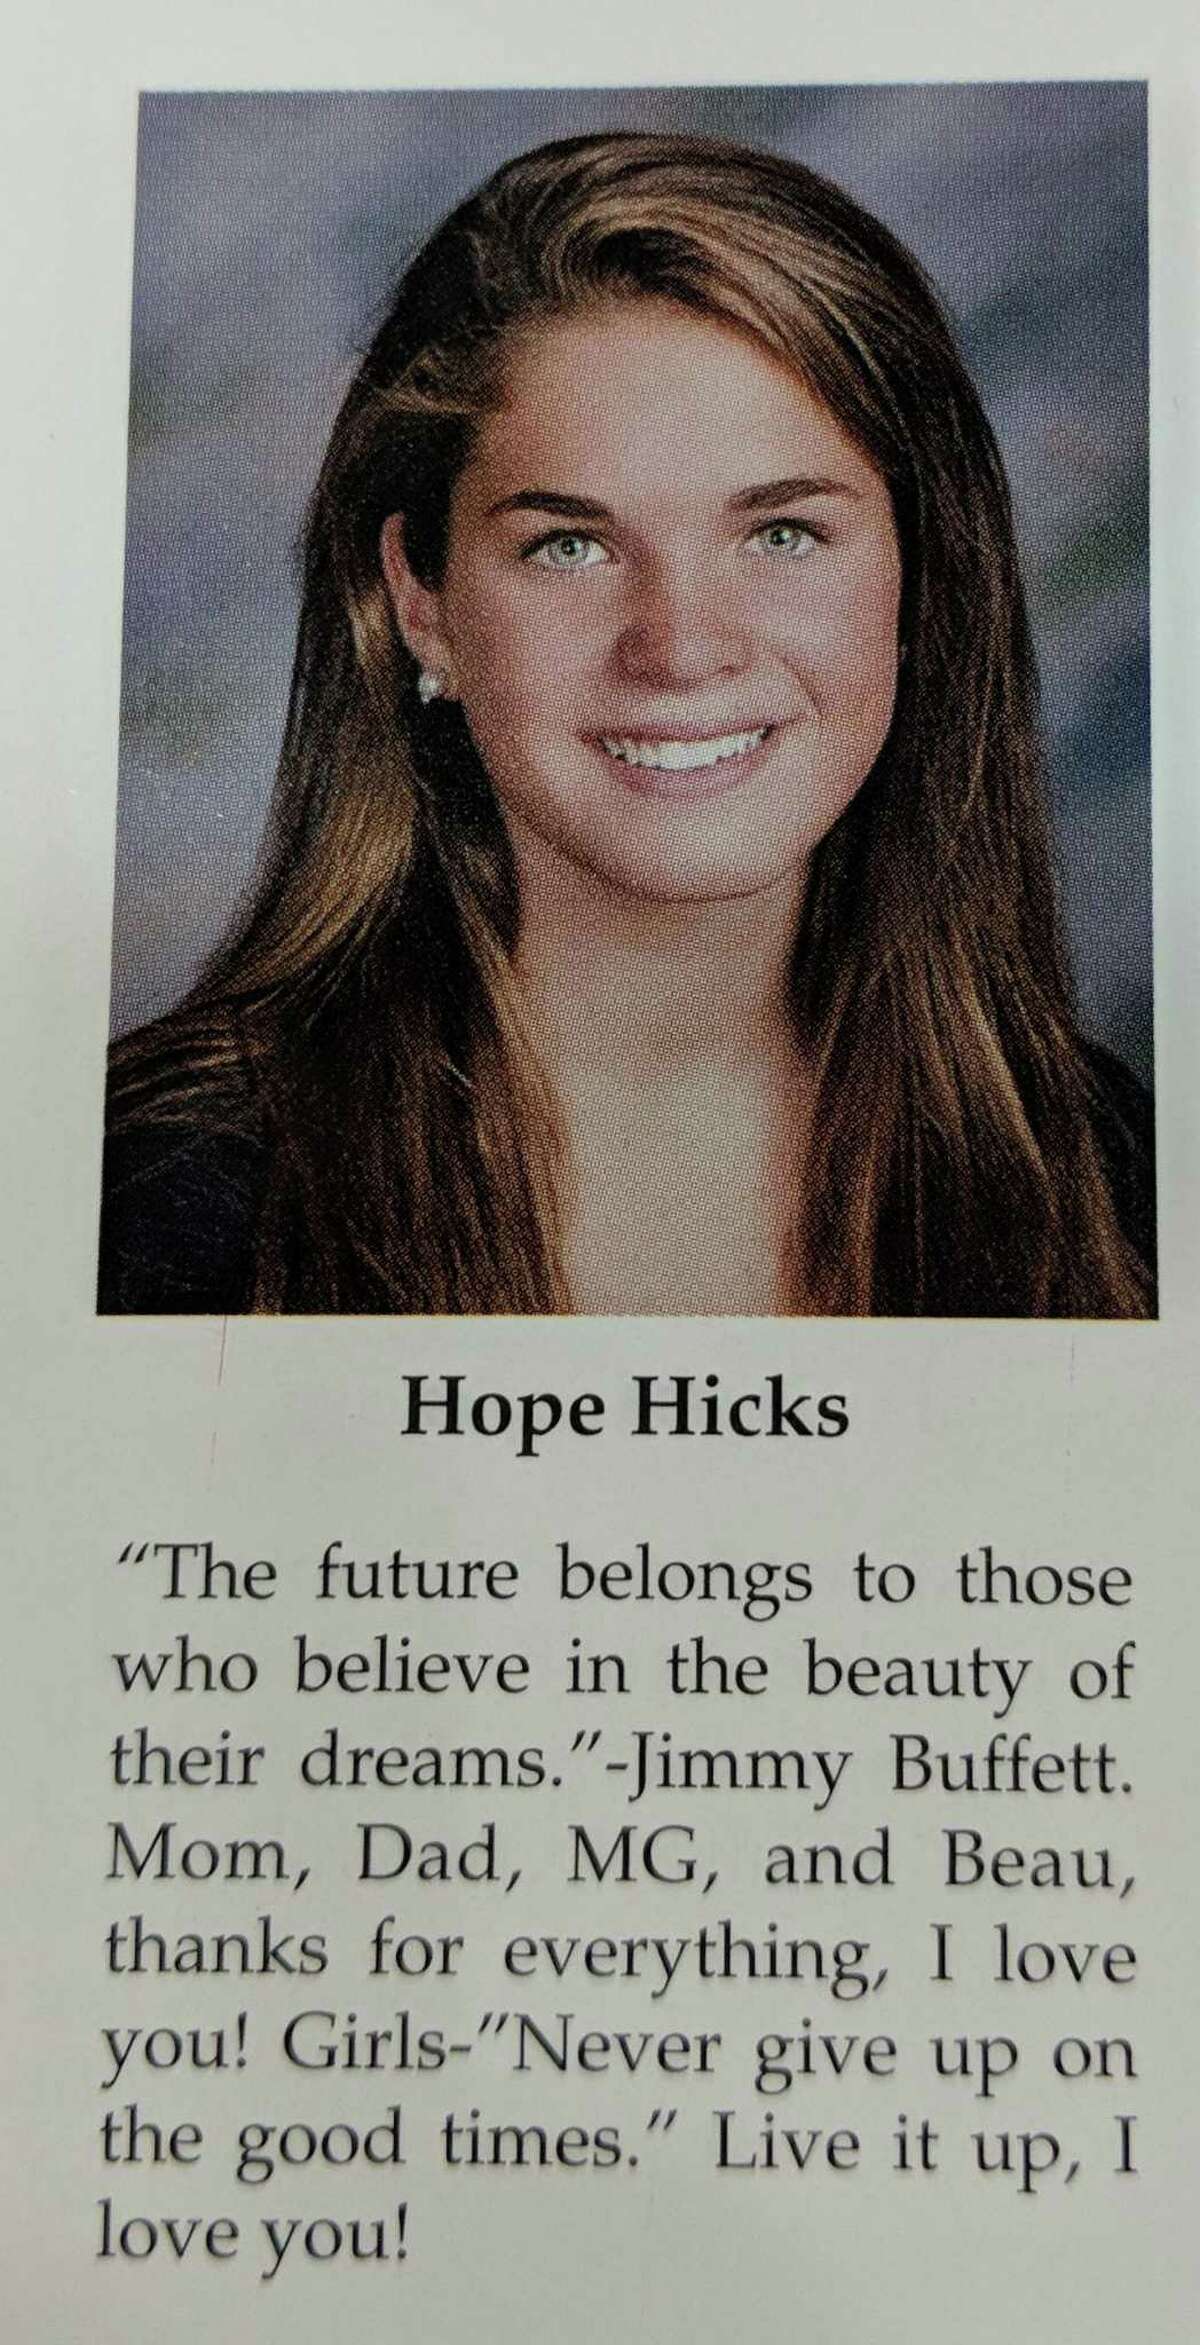 Hope Hicks, 29, in the Greenwich High School 2006 yearbook.